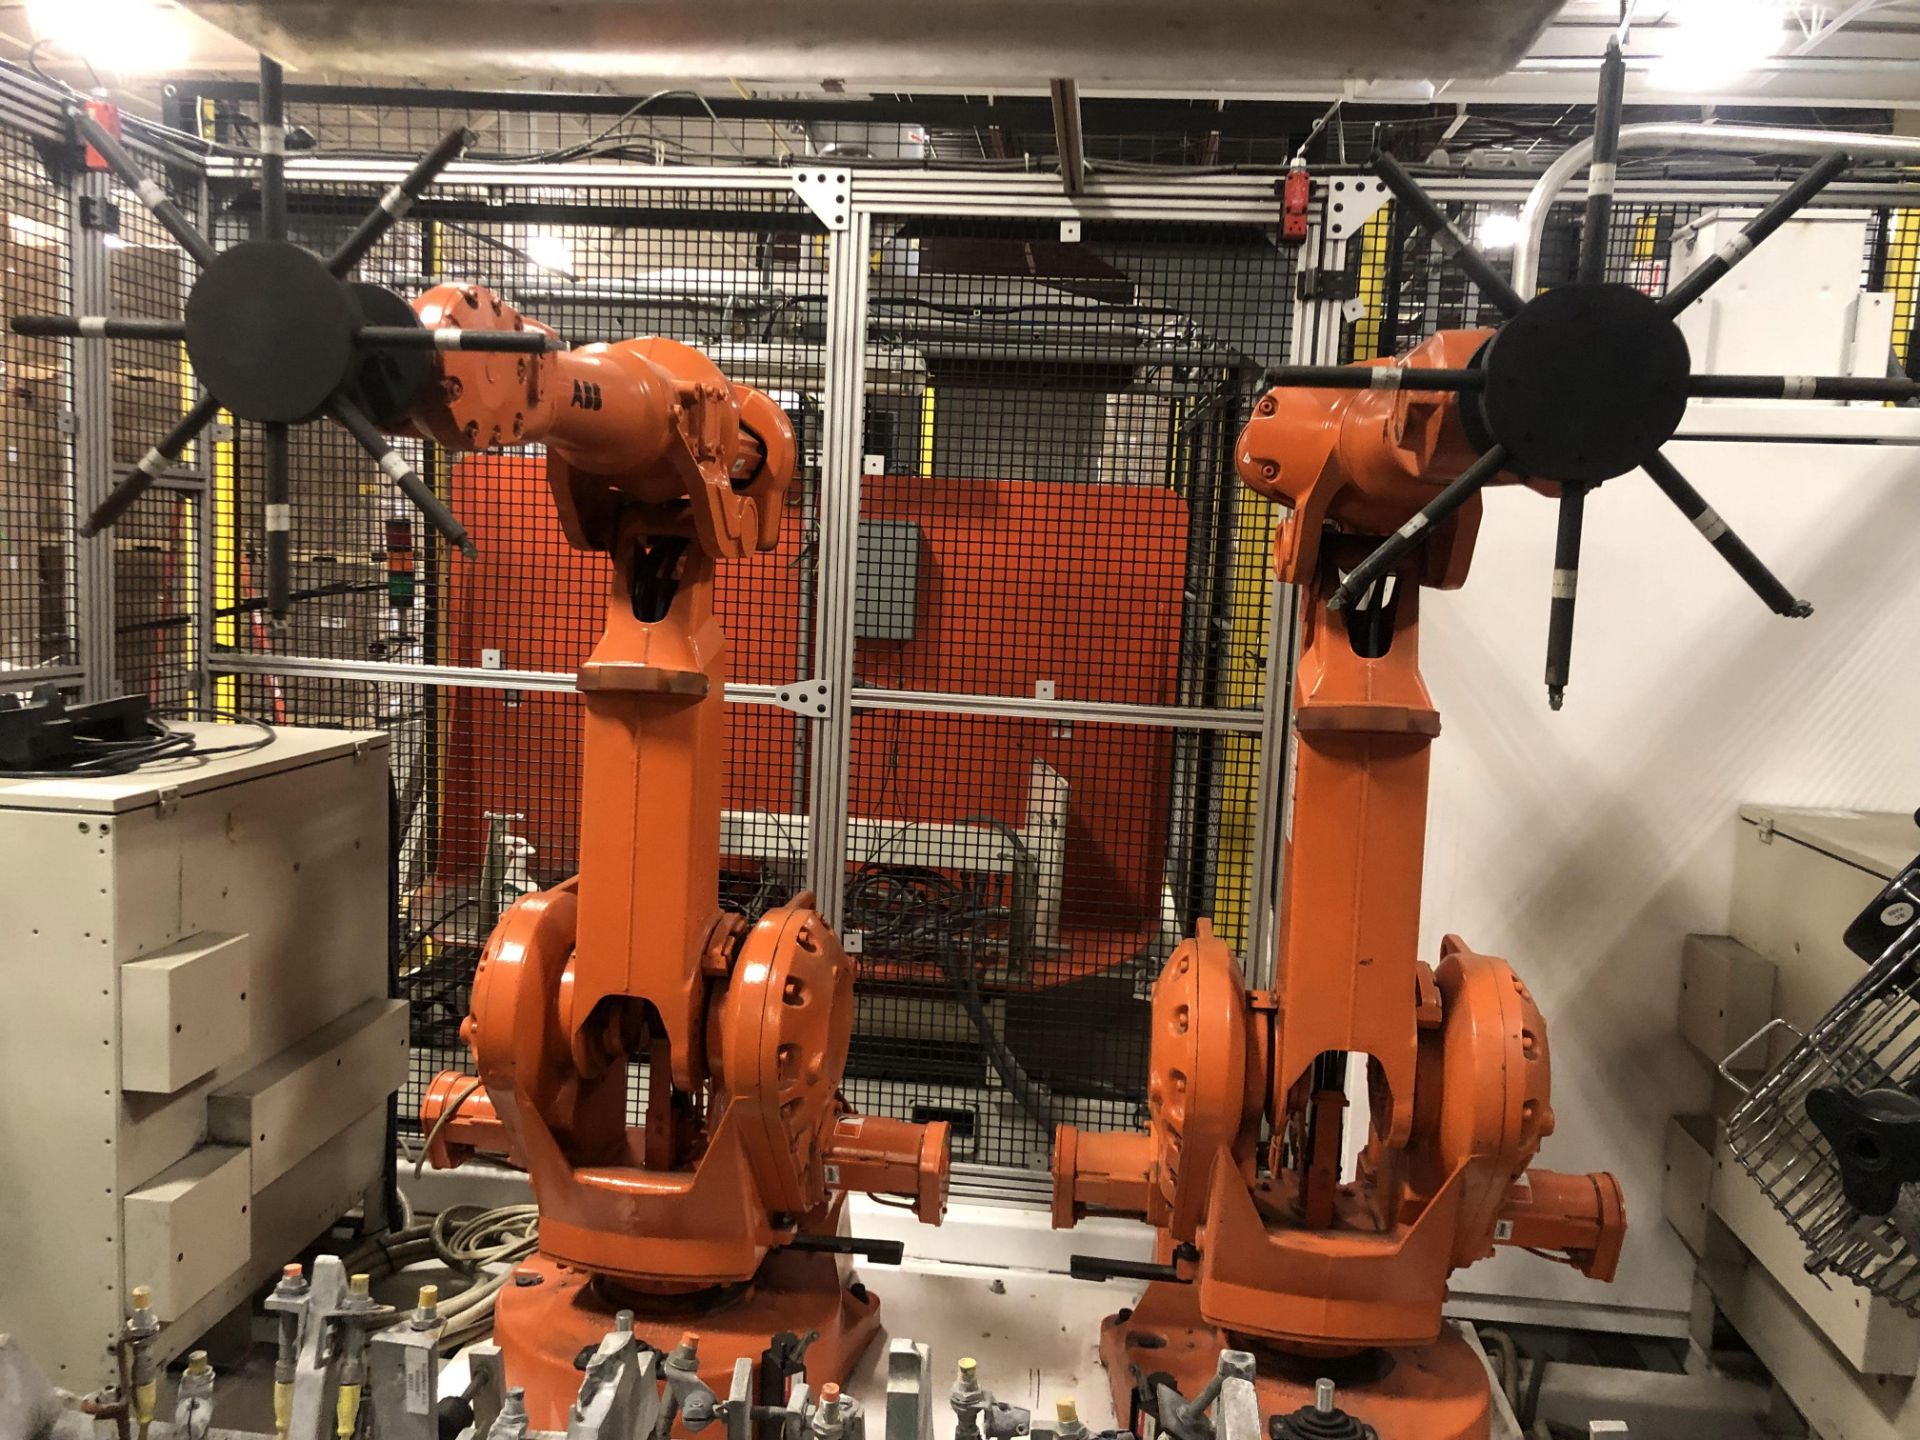 CLIP INSERTION ROBOT CELL WITH 2 ABB ROBOTS IRB 2400 M2000 SN 248135 & 248136